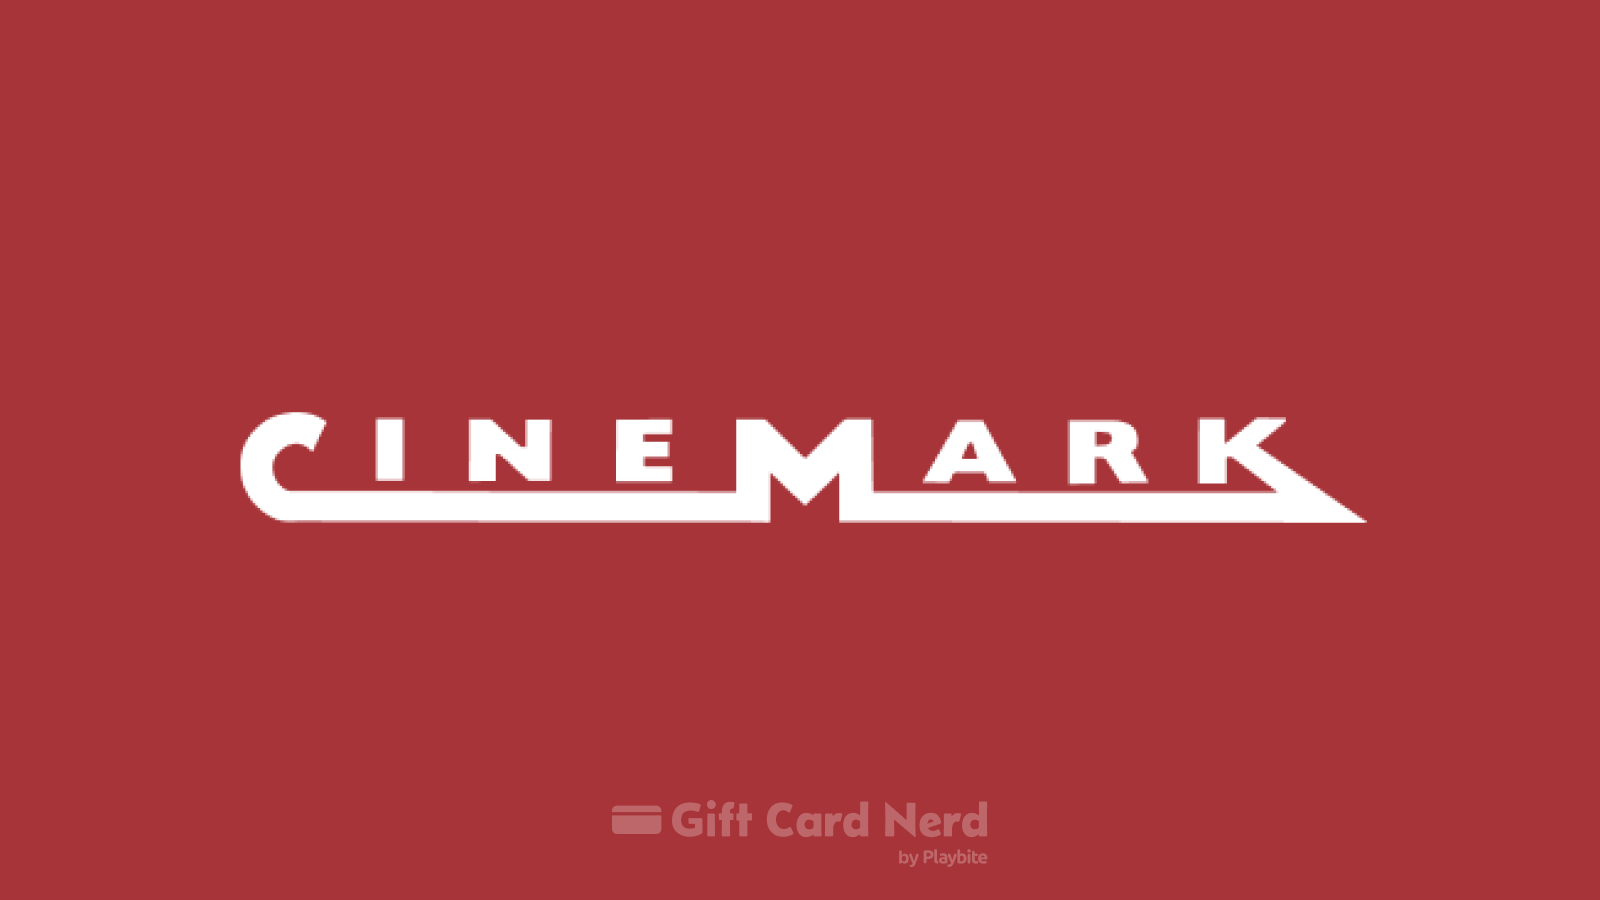 Does Target Sell Cinemark Gift Cards?